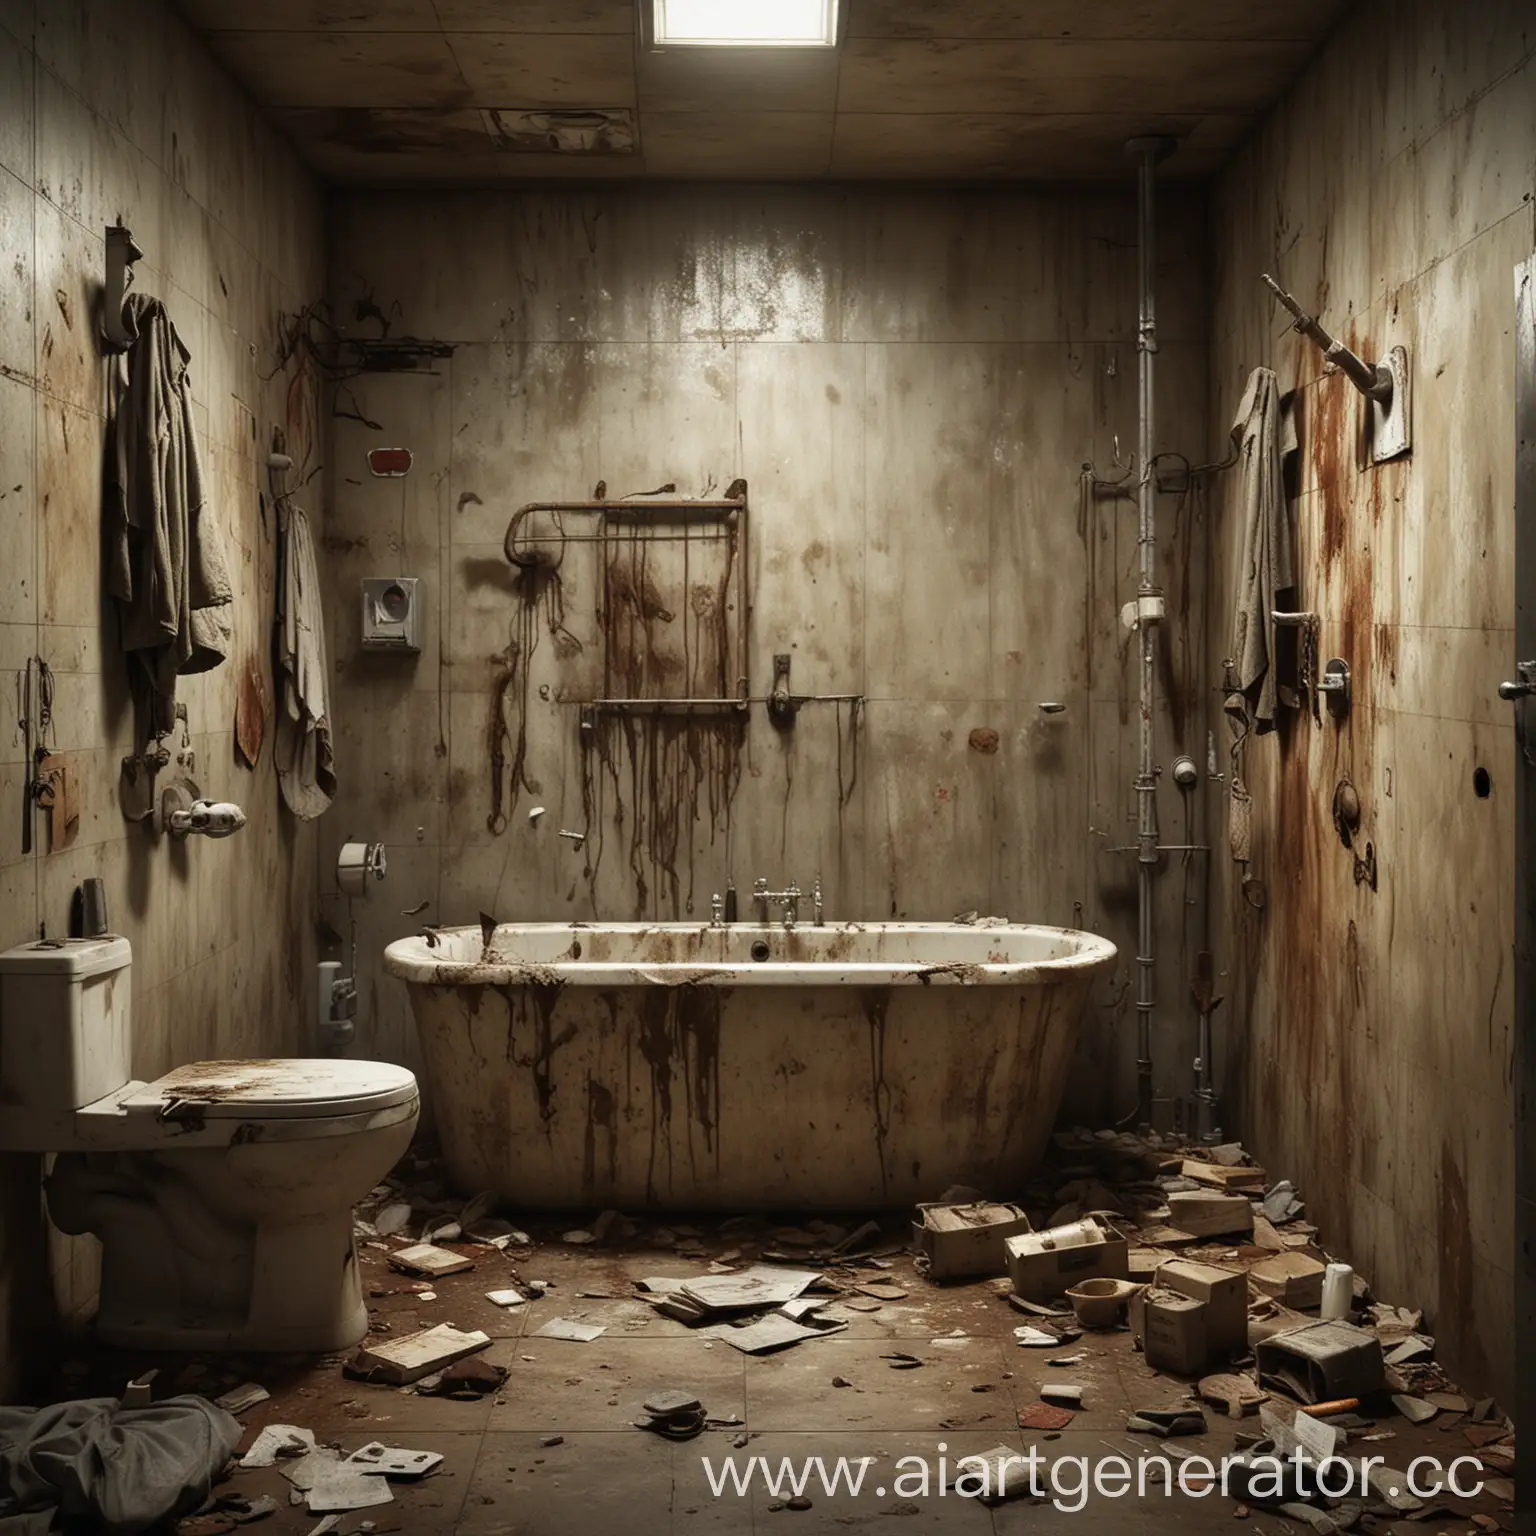 PostApocalyptic-Bathroom-Scene-Surviving-the-Deadly-Fallout